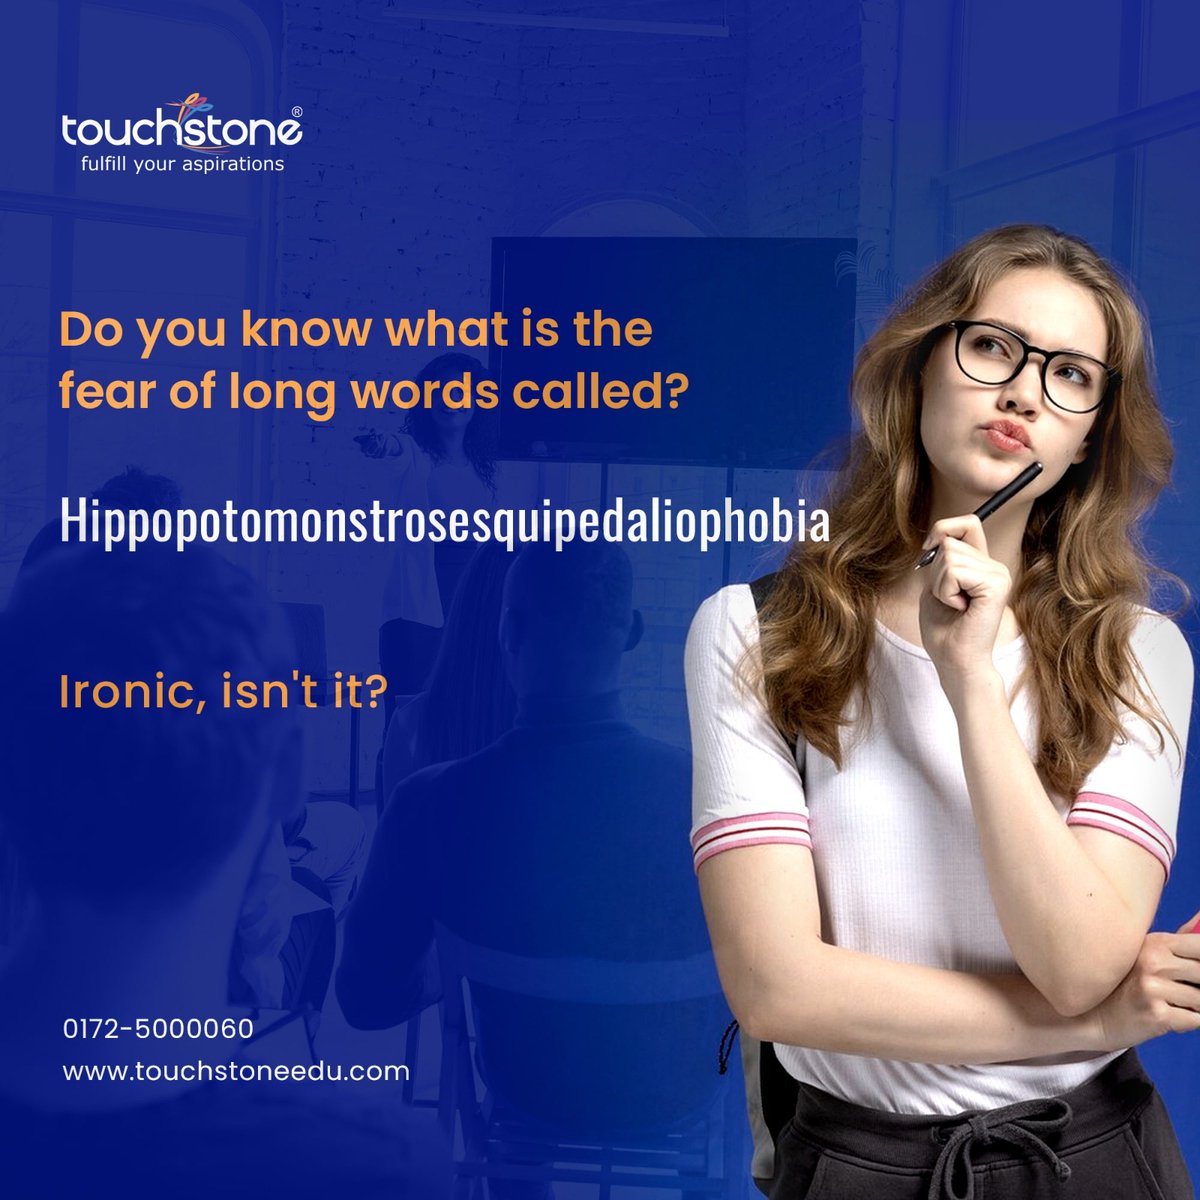 Do you have this phobia? Let us know in the comments below.
#Touchstoneonline #touchstoneedu #TouchstoneEducationals #touchstone #englishvocabulary #englishlanguage #spellingchallenge #spelling #englishteaching #englishquiz #englishclass